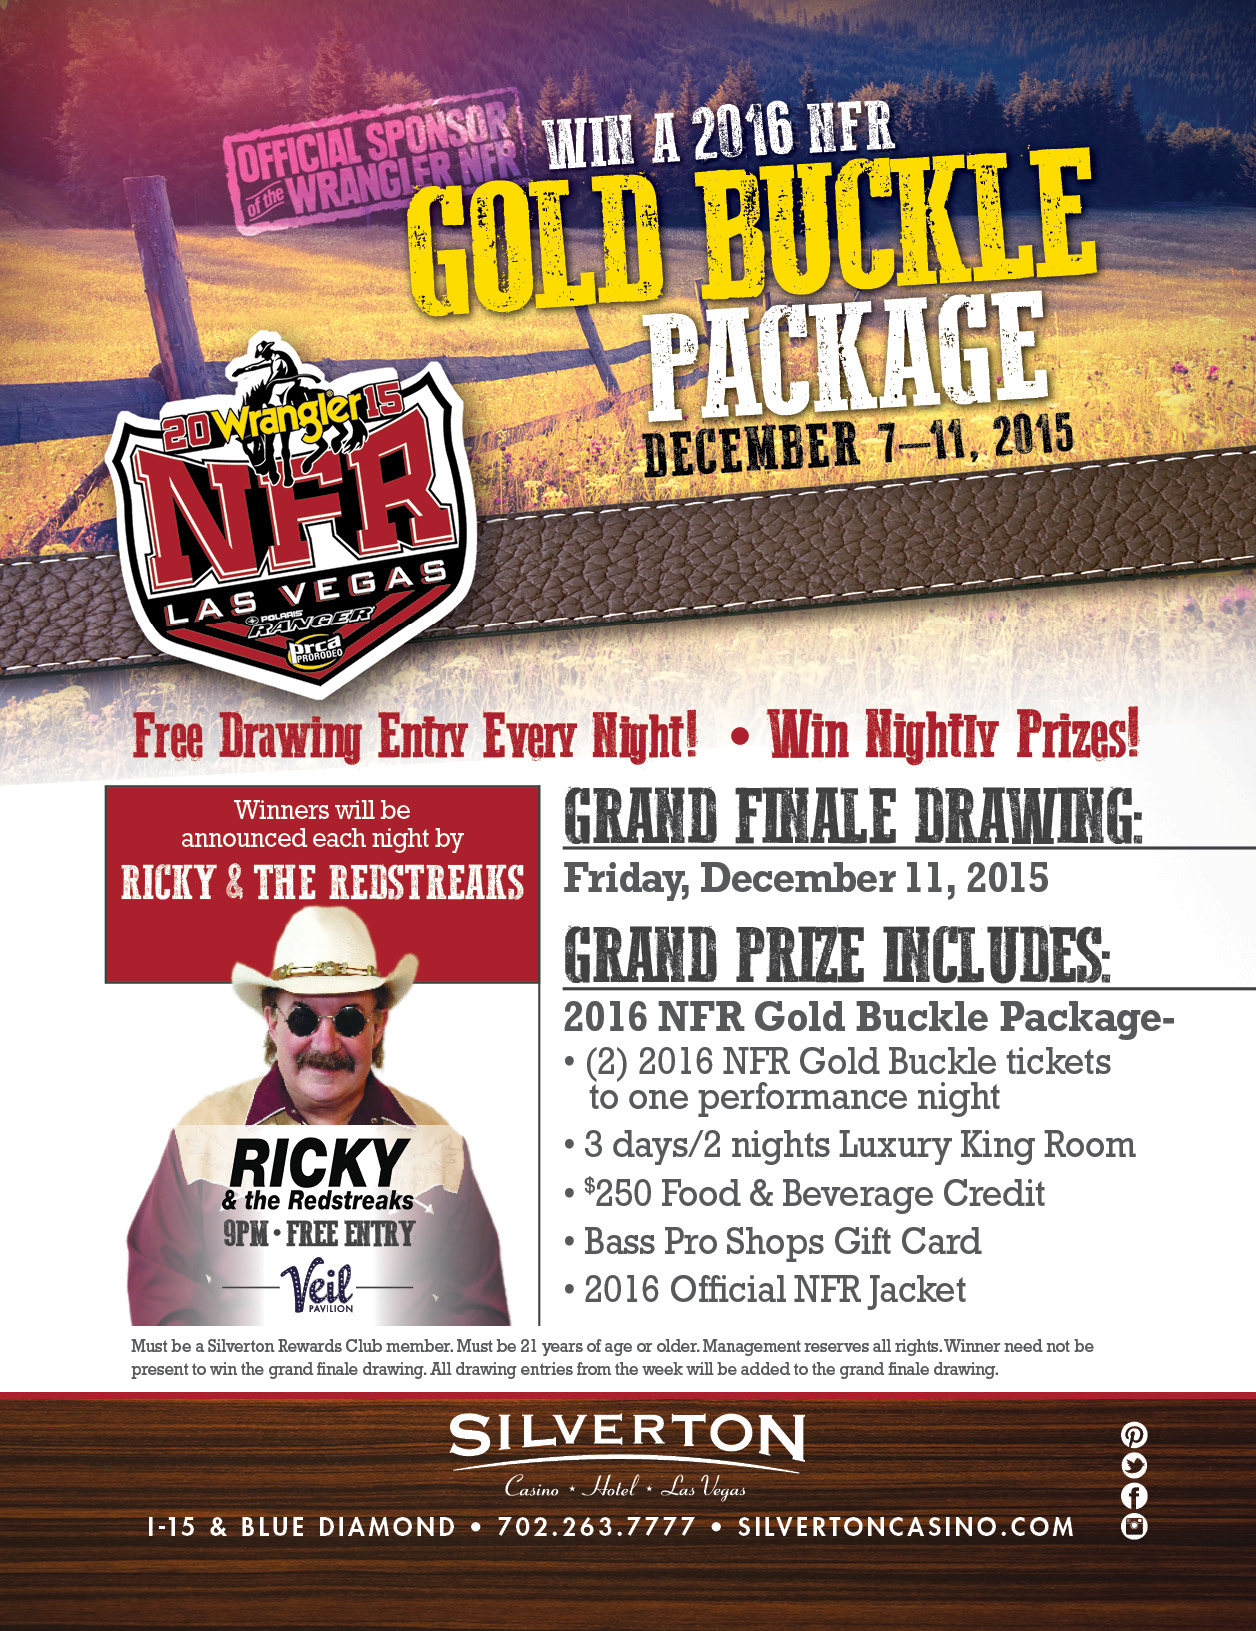 Win 2016 NFR Gold Buckle Package at Silverton Casino Hotel